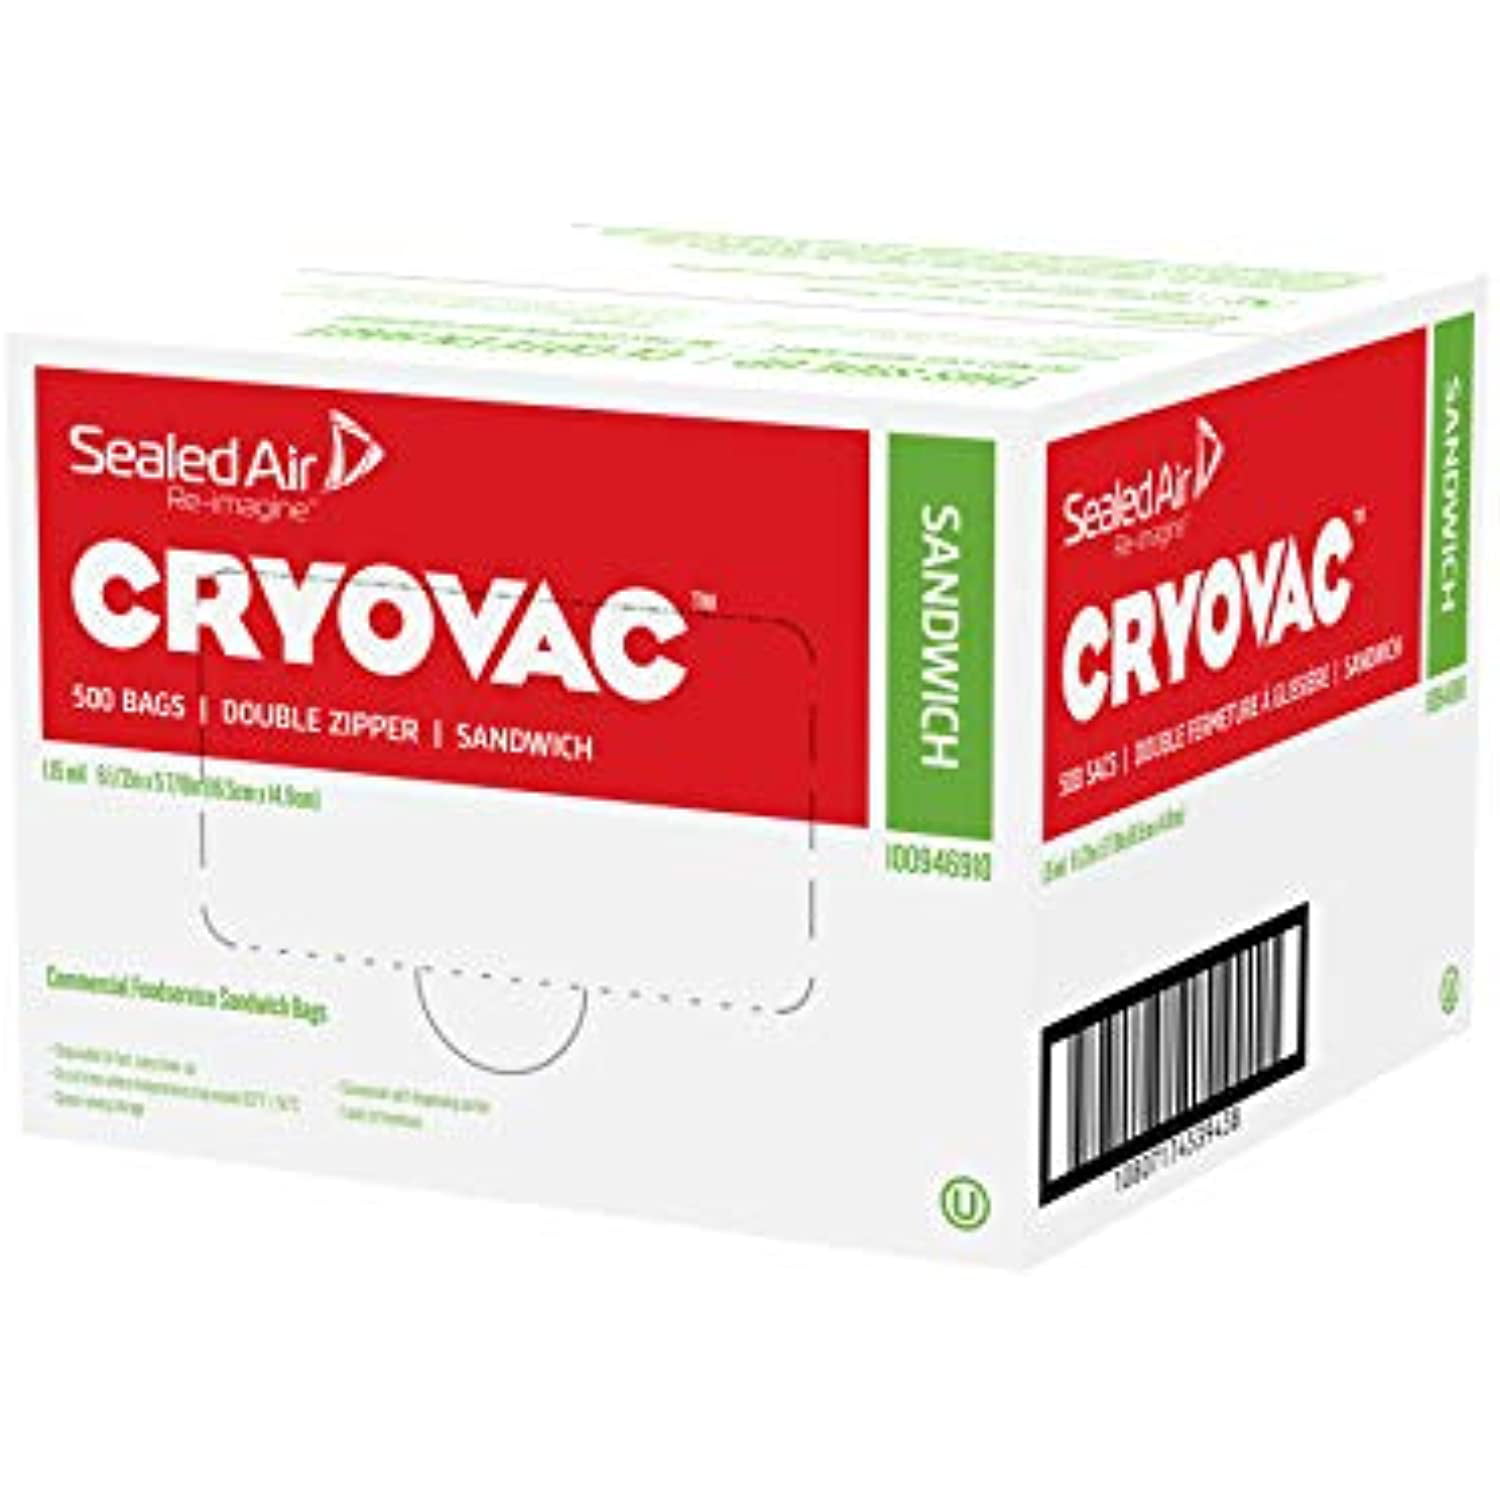 Buy Cryovac Bags • Best Brands • All Sizes • Hans in Luck